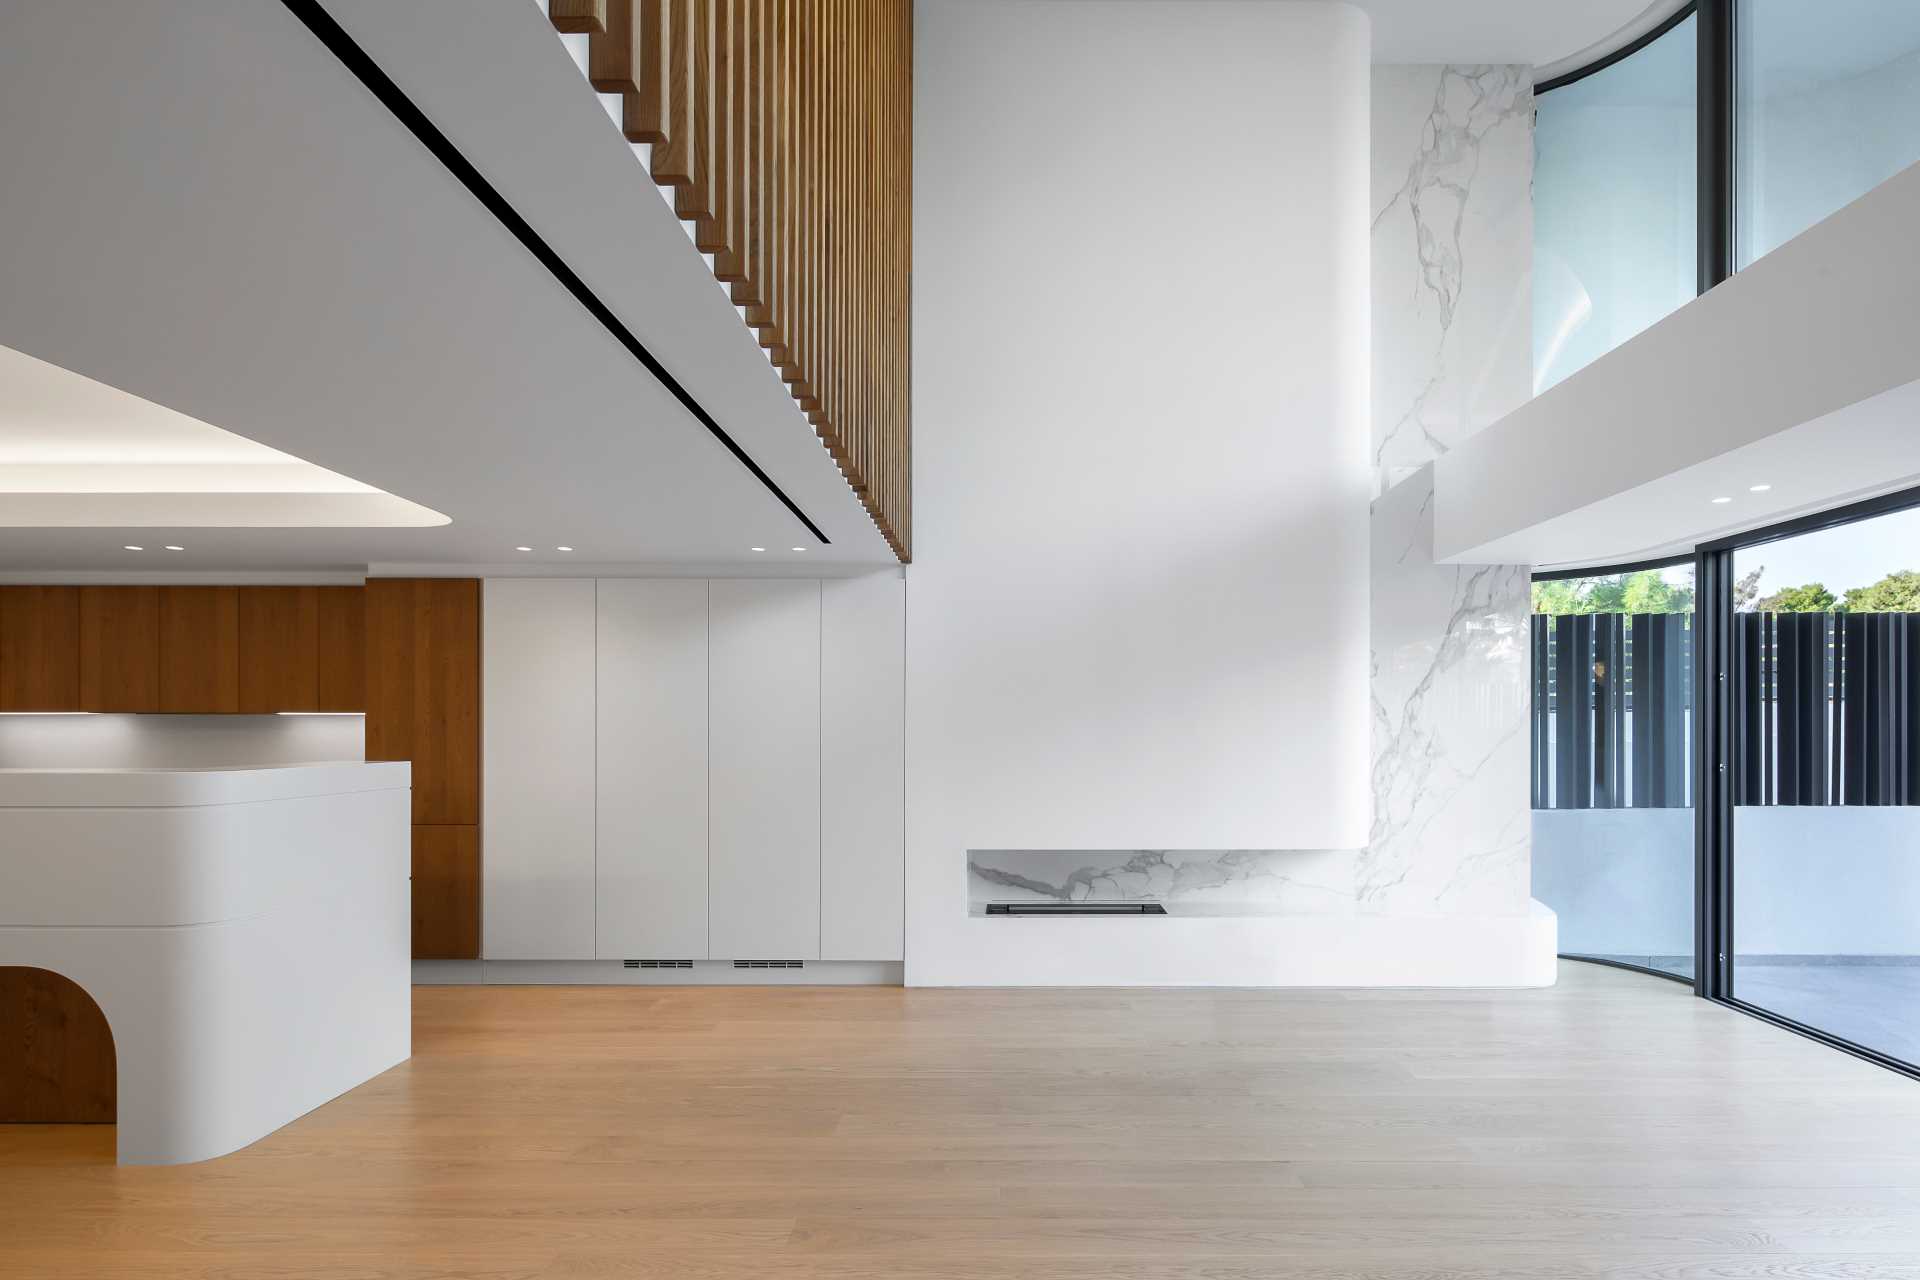 A modern white interior with wood accents and flooring.